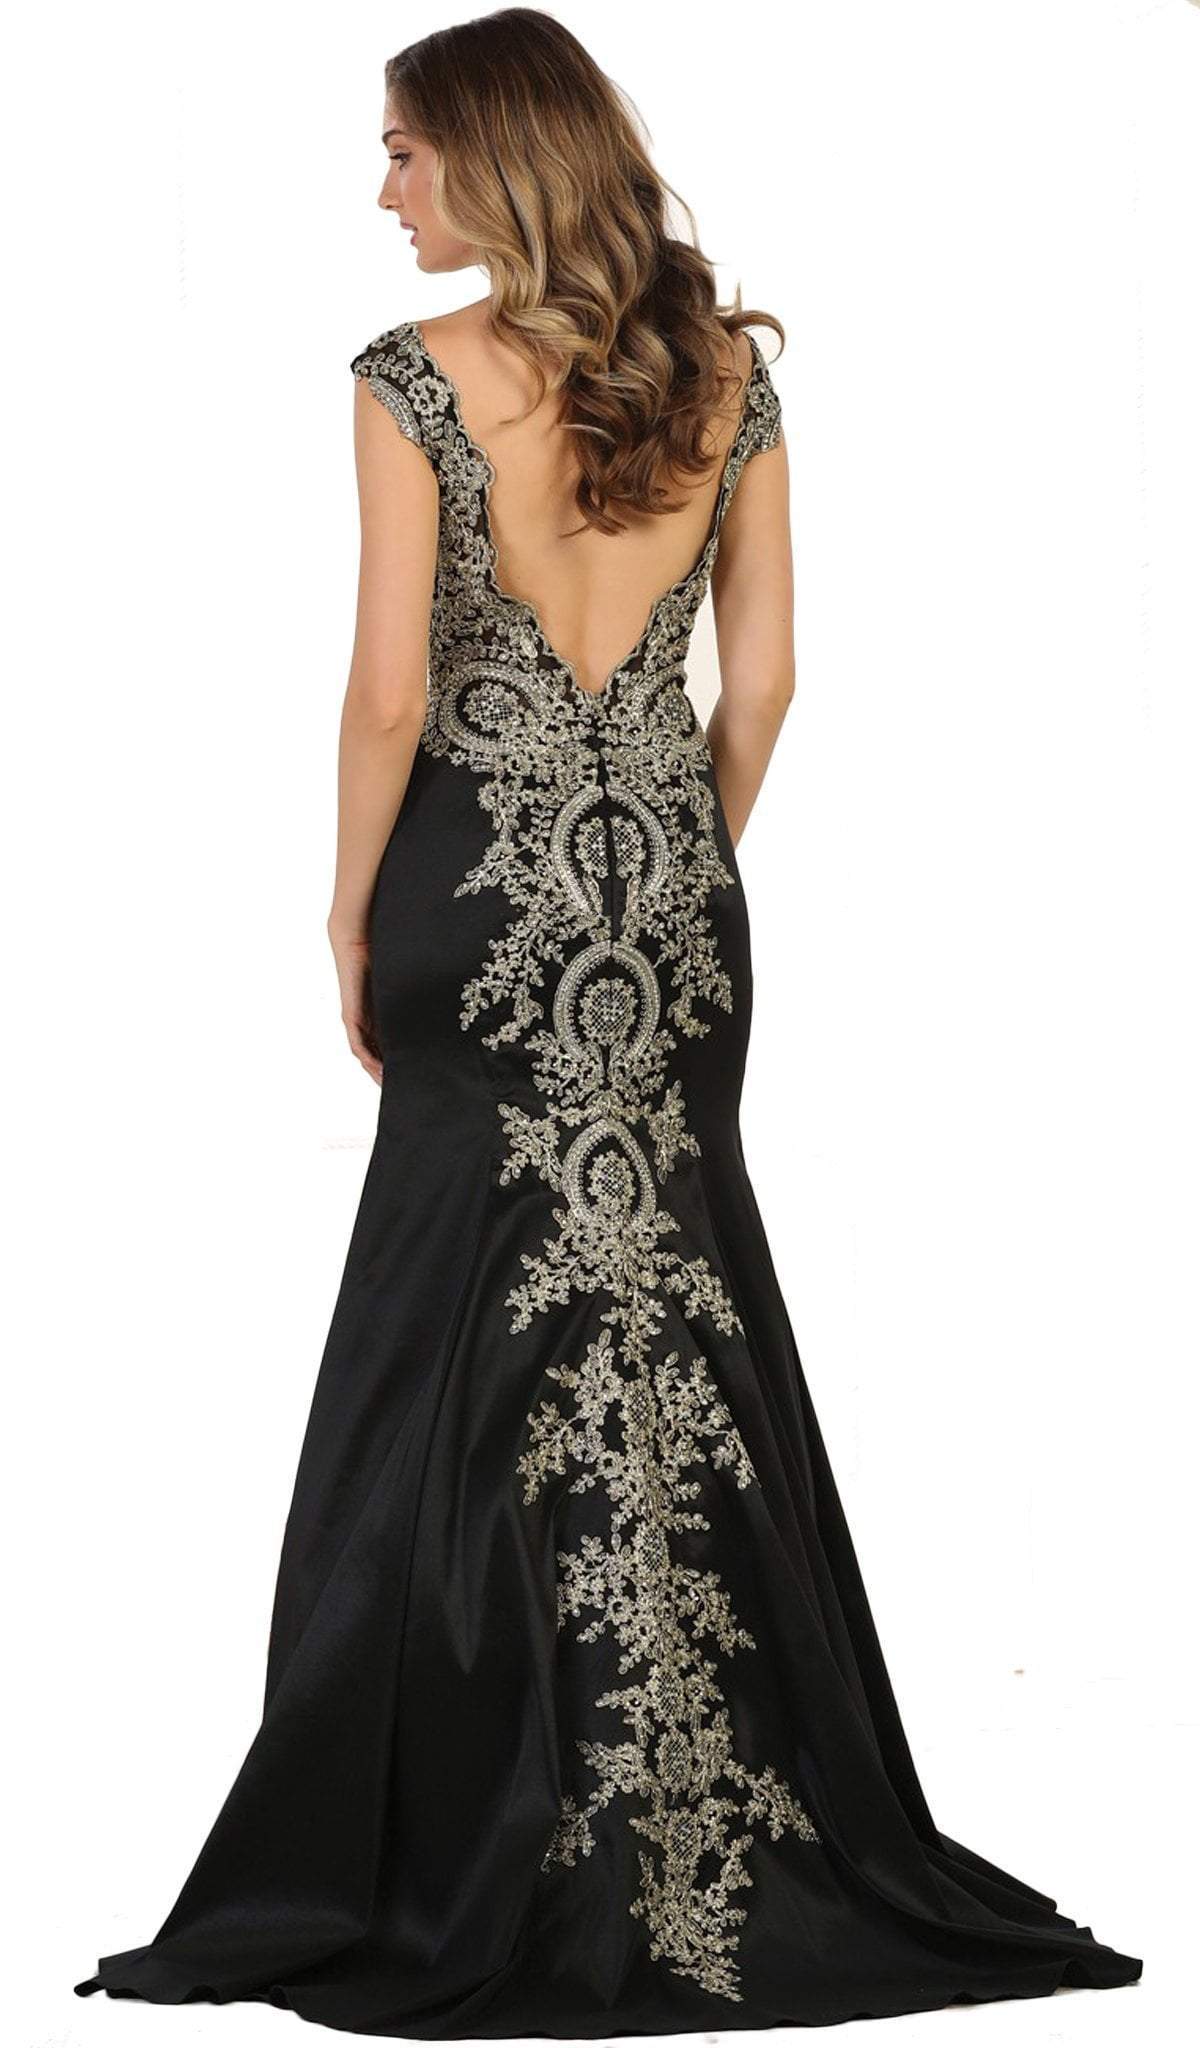 May Queen - RQ7602 Embellished Wide V-neck Sheath Mother of the Bride Gown Special Occasion Dress